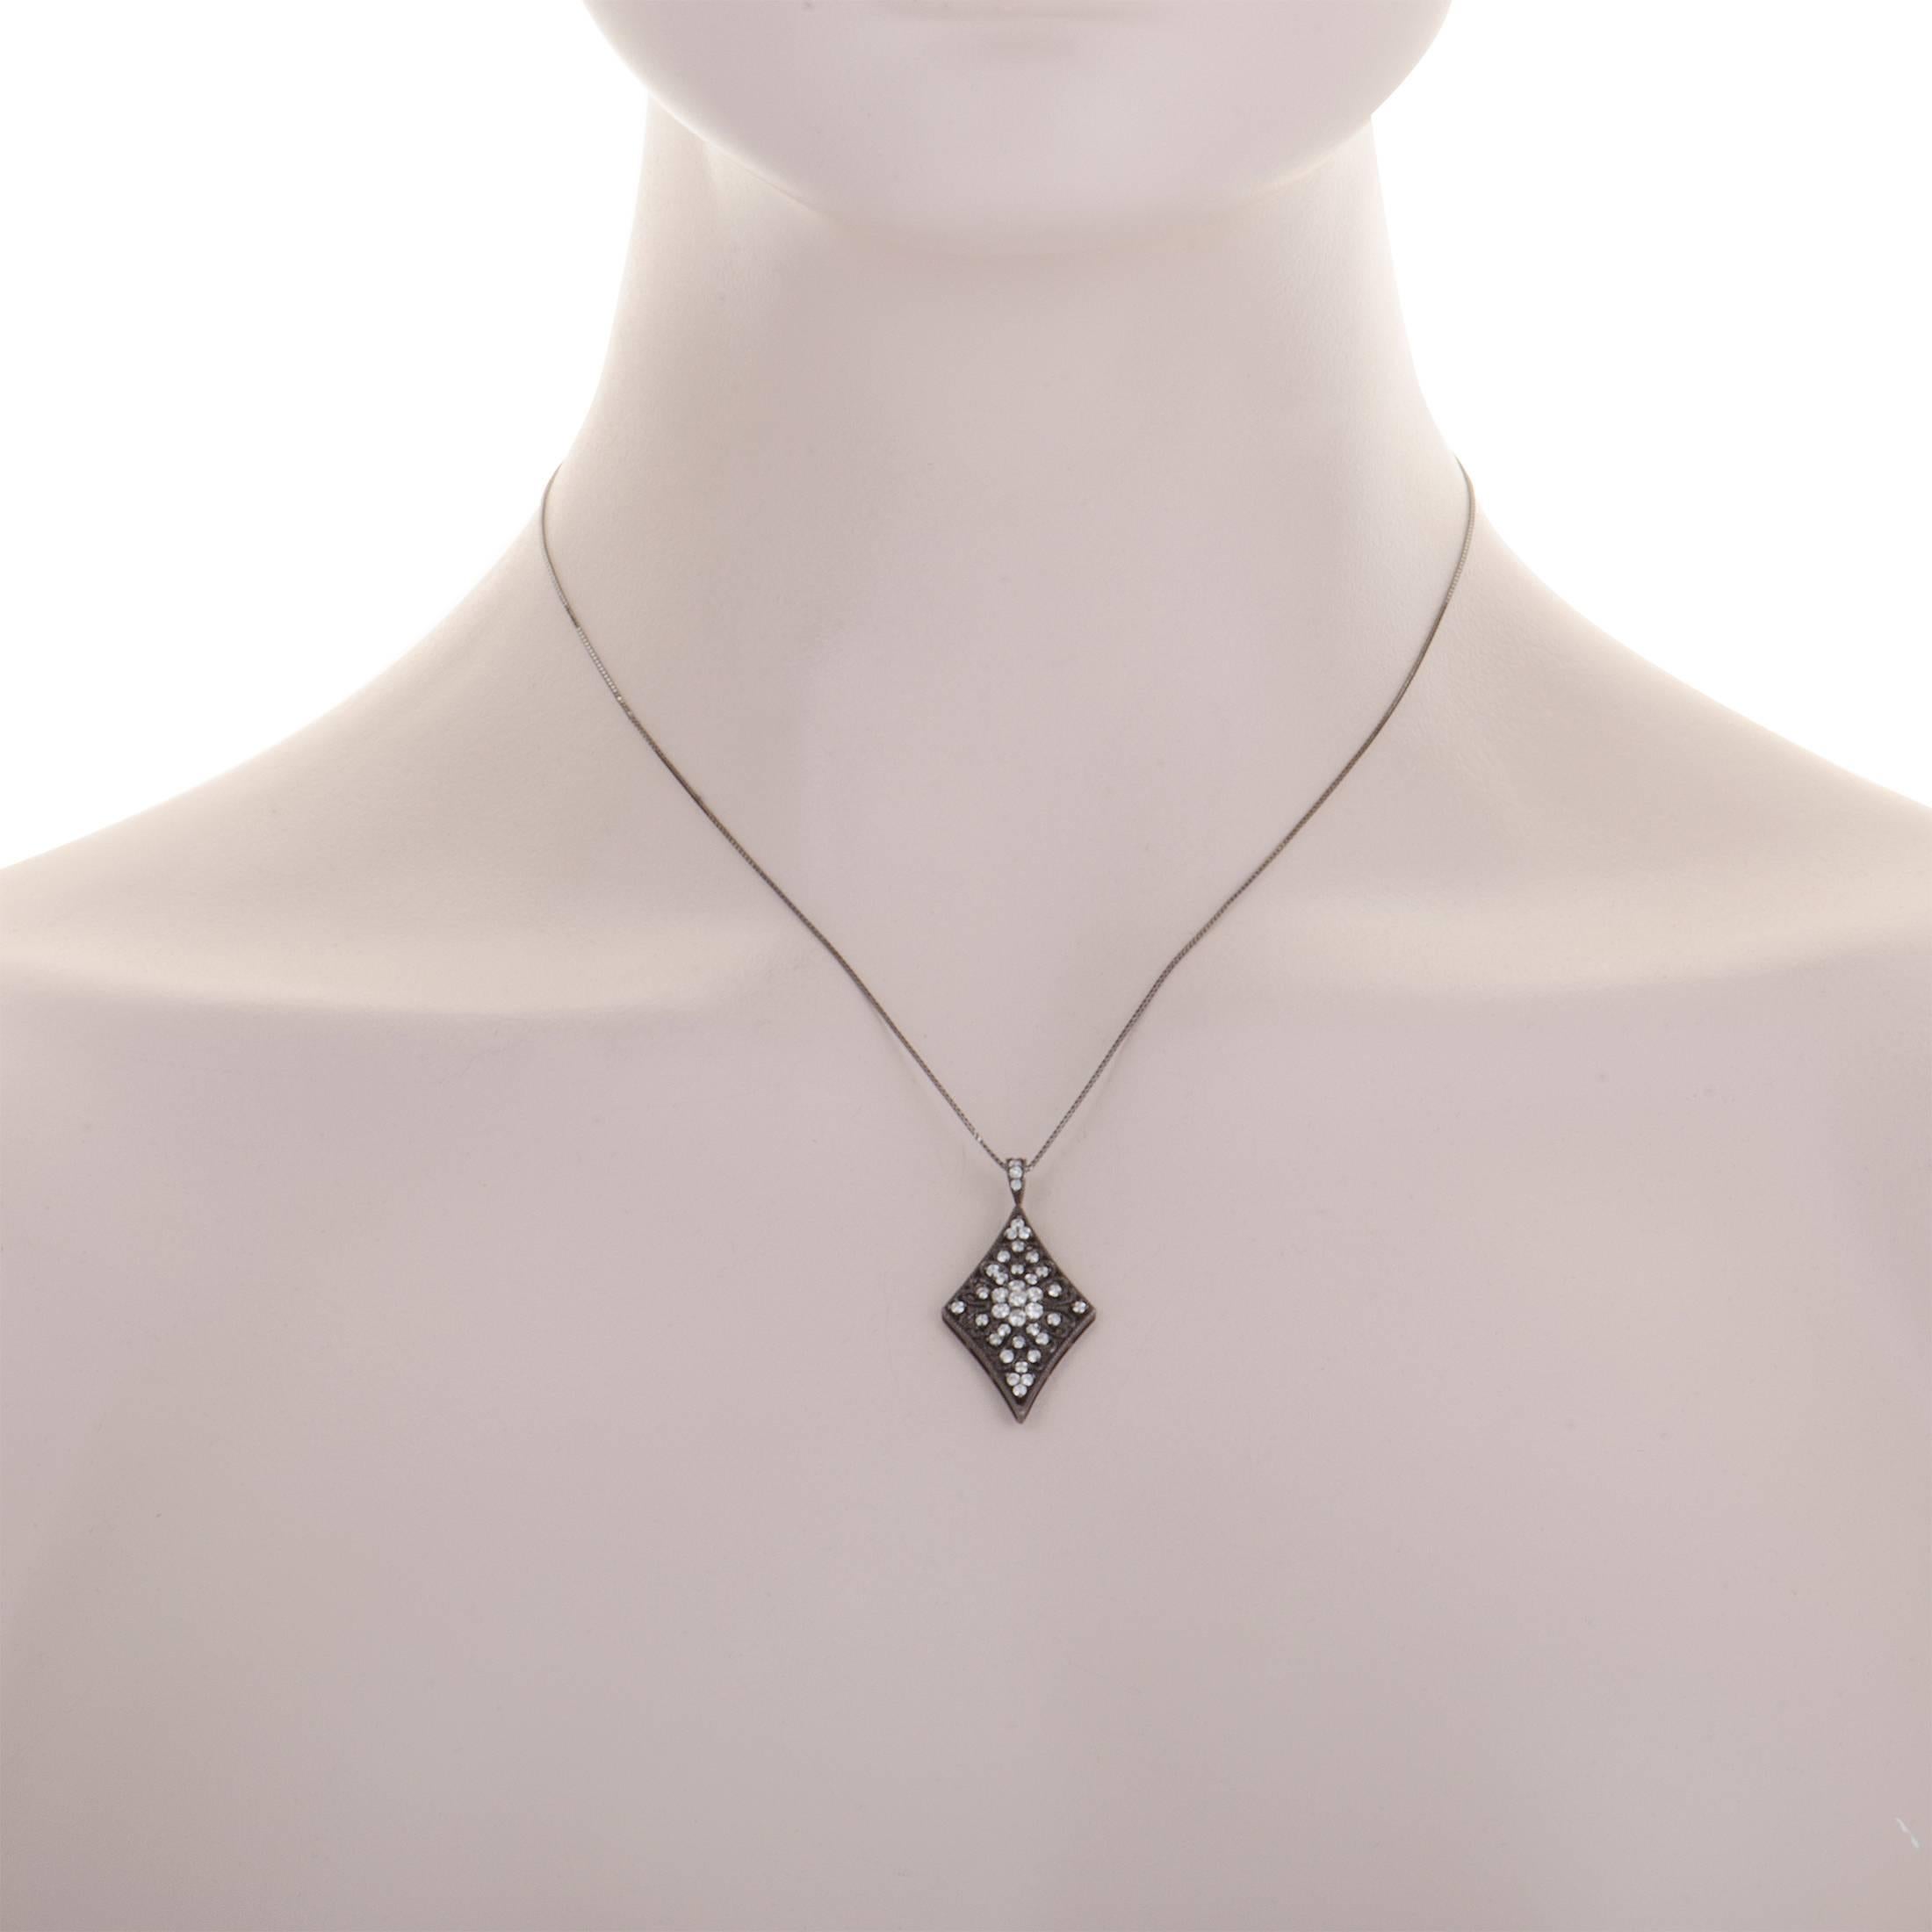 Plated with black rhodium, this 18K white gold necklace offers an incredibly eye-catching, offbeat appearance. The pendant features nifty intricate décor and it is set with scintillating diamonds that weigh in total 0.70 carats.
Pendant Dimensions: